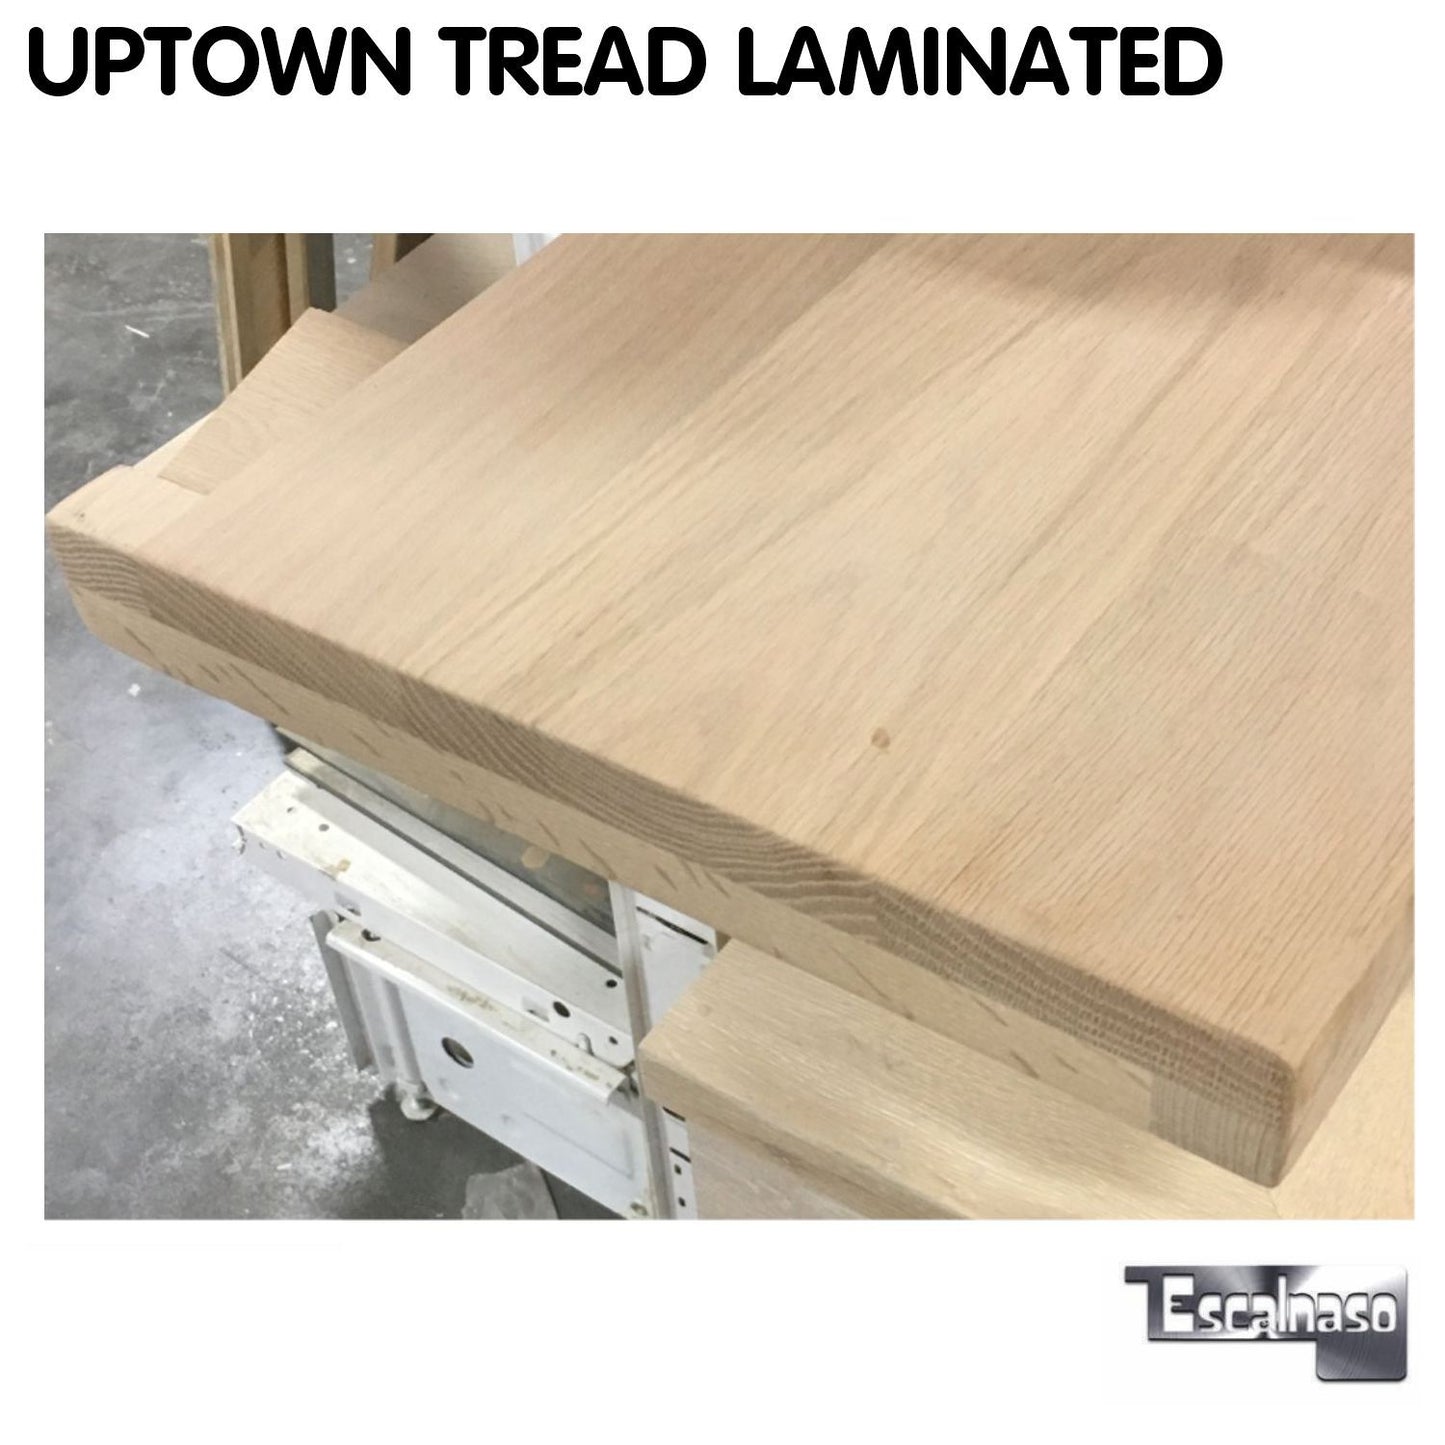 (13640) UPTOWN TREAD ADD CAP TO BOTH SIDES